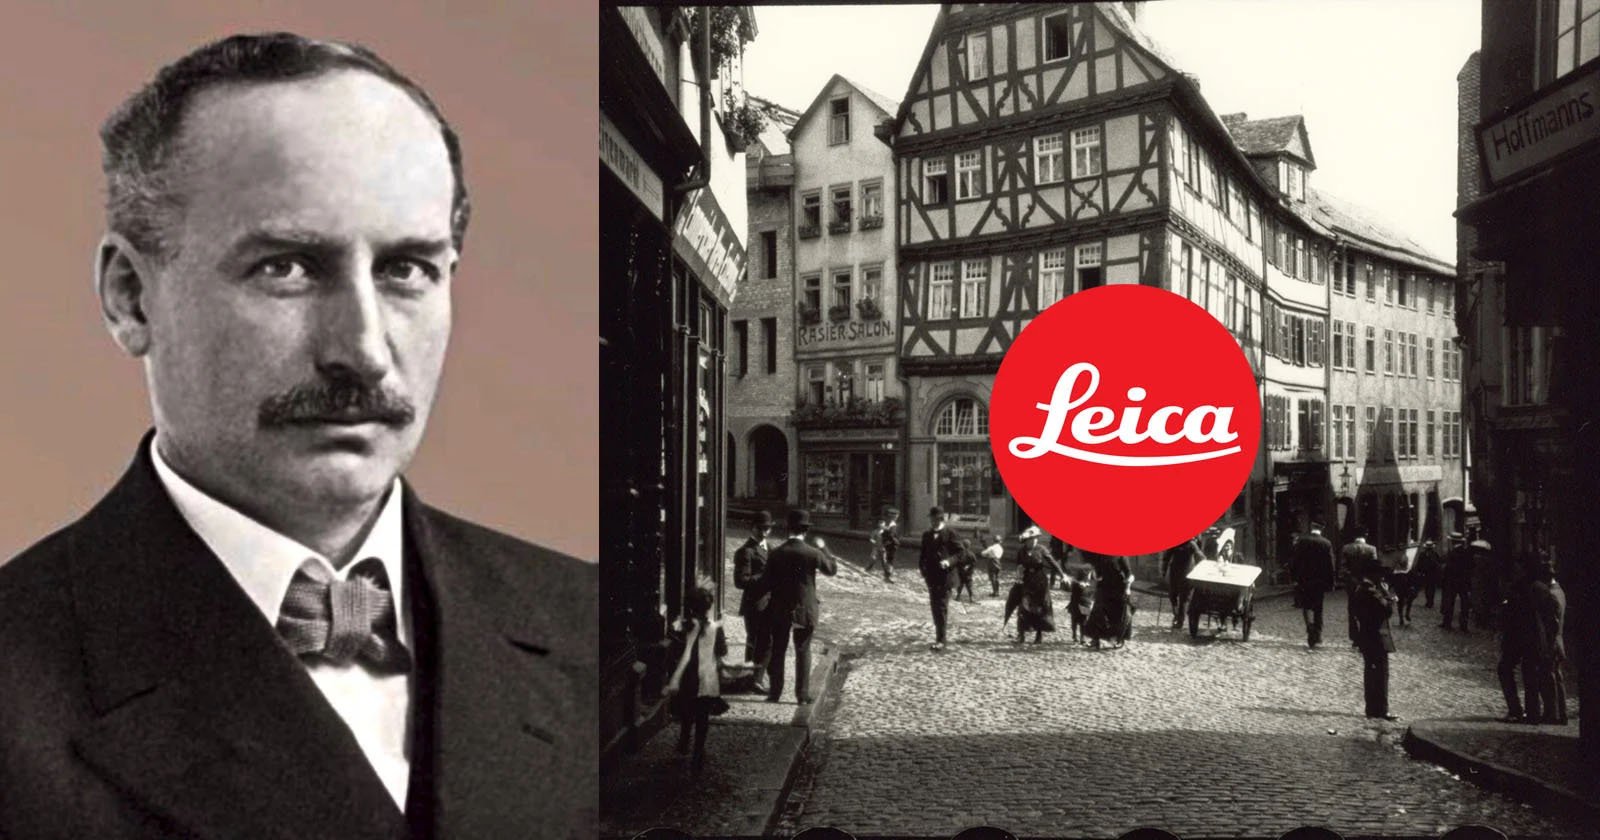 A black and white photo shows an old European town with half-timbered houses and cobbled streets bustling with people. To the left, a portrait of a stern-faced man with a mustache. The red Leica logo is placed prominently on the right side of the image.